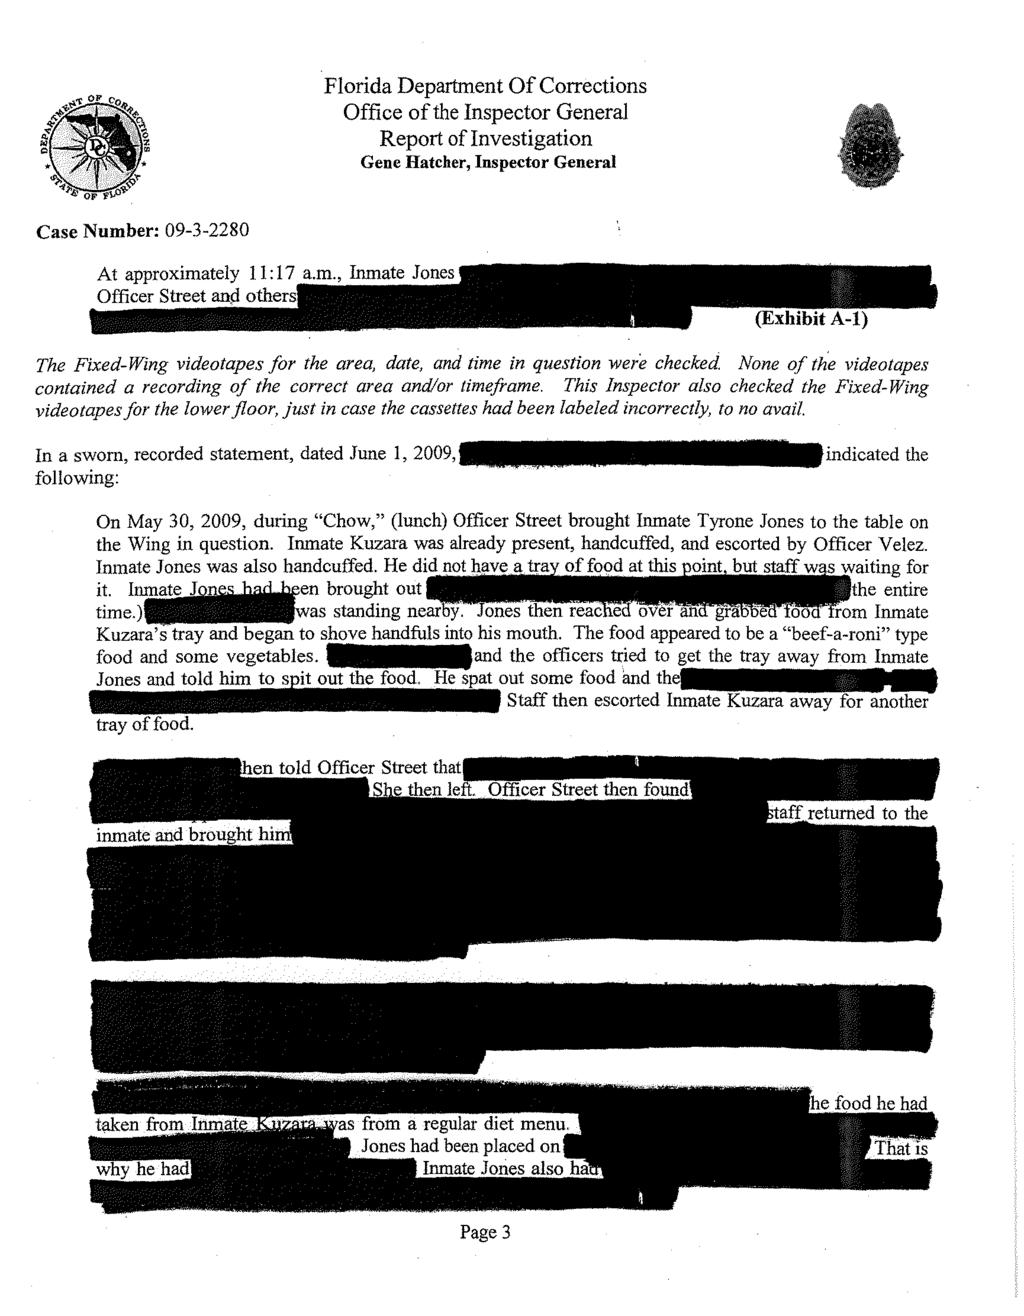 Florida Department OfCorrections Report oflnvestigation At approximately Officer Street nfhp~o The Fixed-Wing videotapes for the area, date, and time in question were checked None of the videotapes